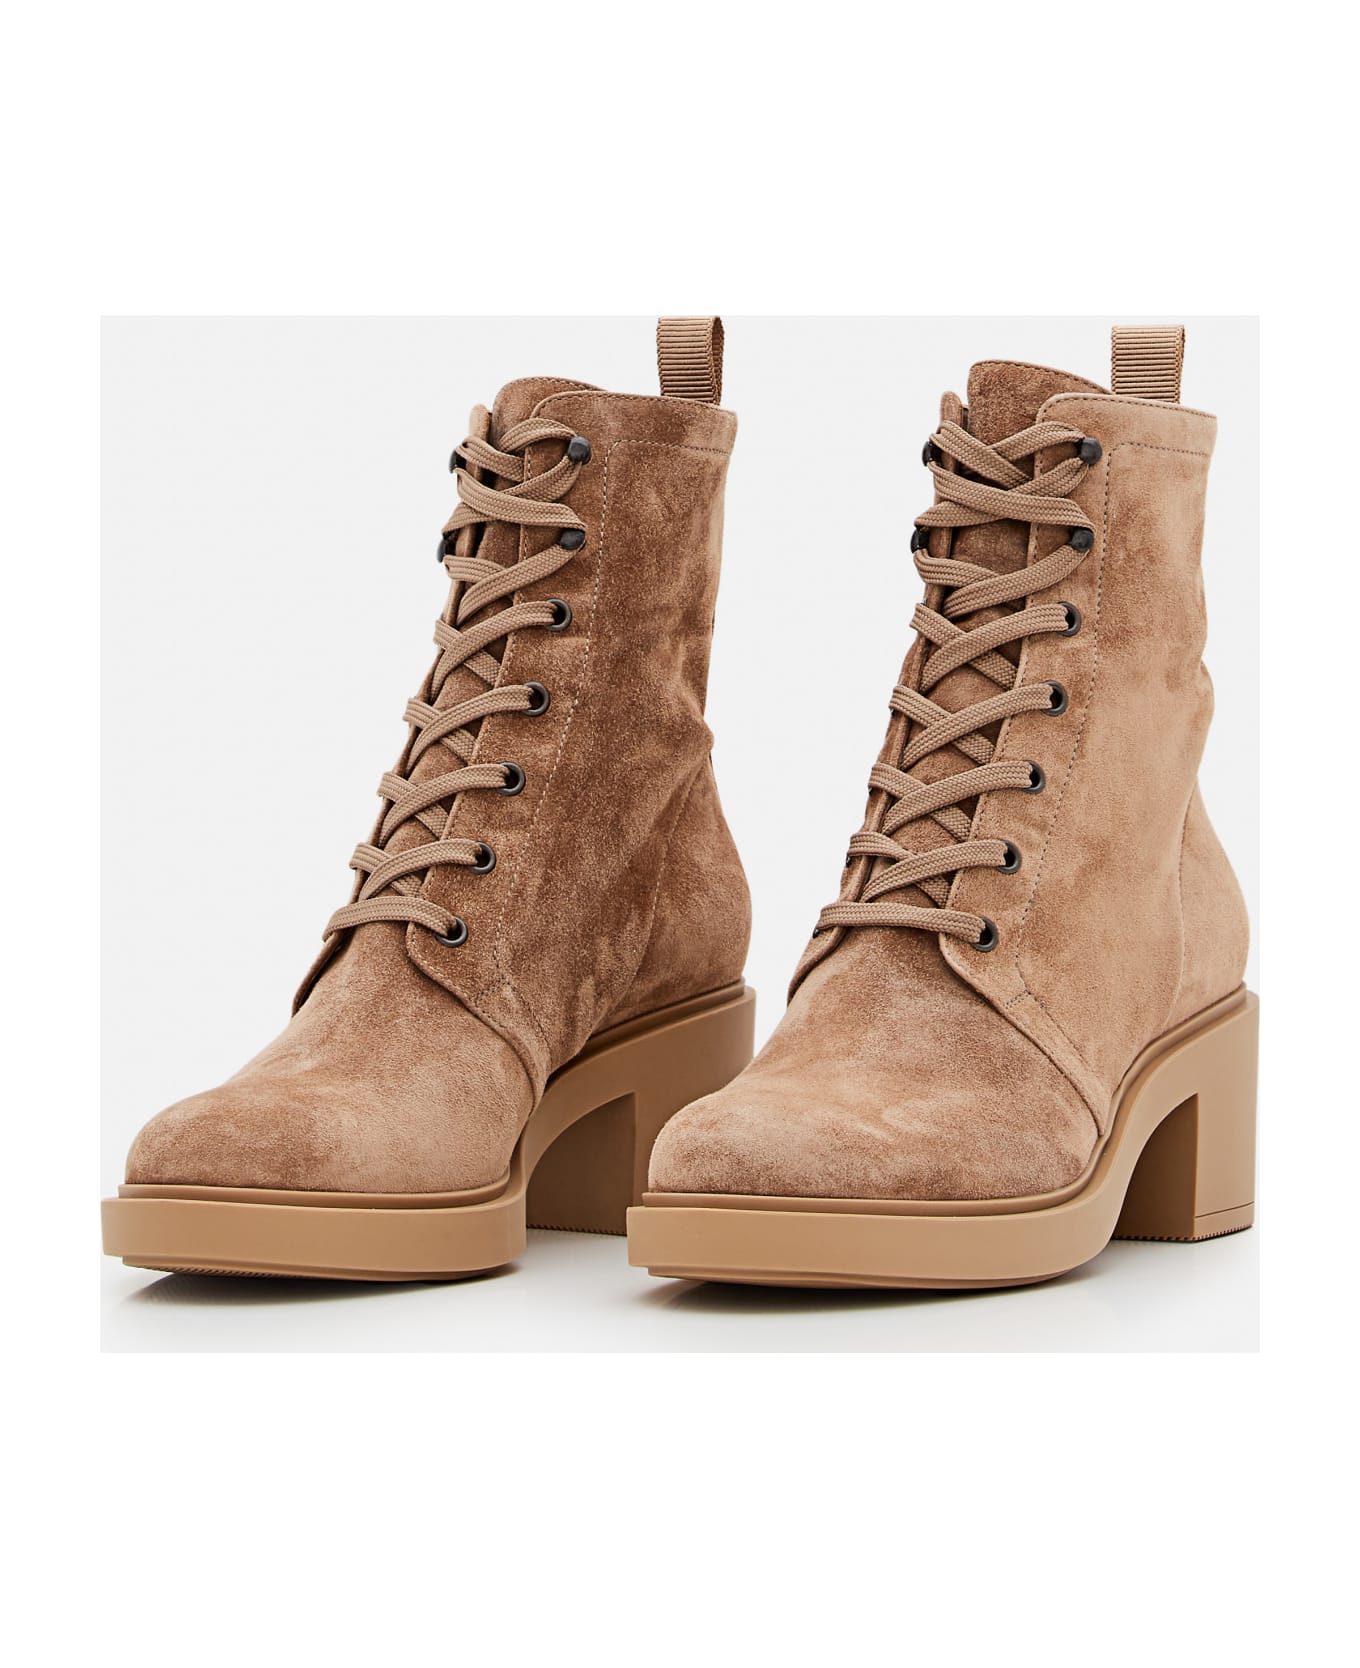 Gianvito Rossi Foster Lace-up Suede Boots - Brown